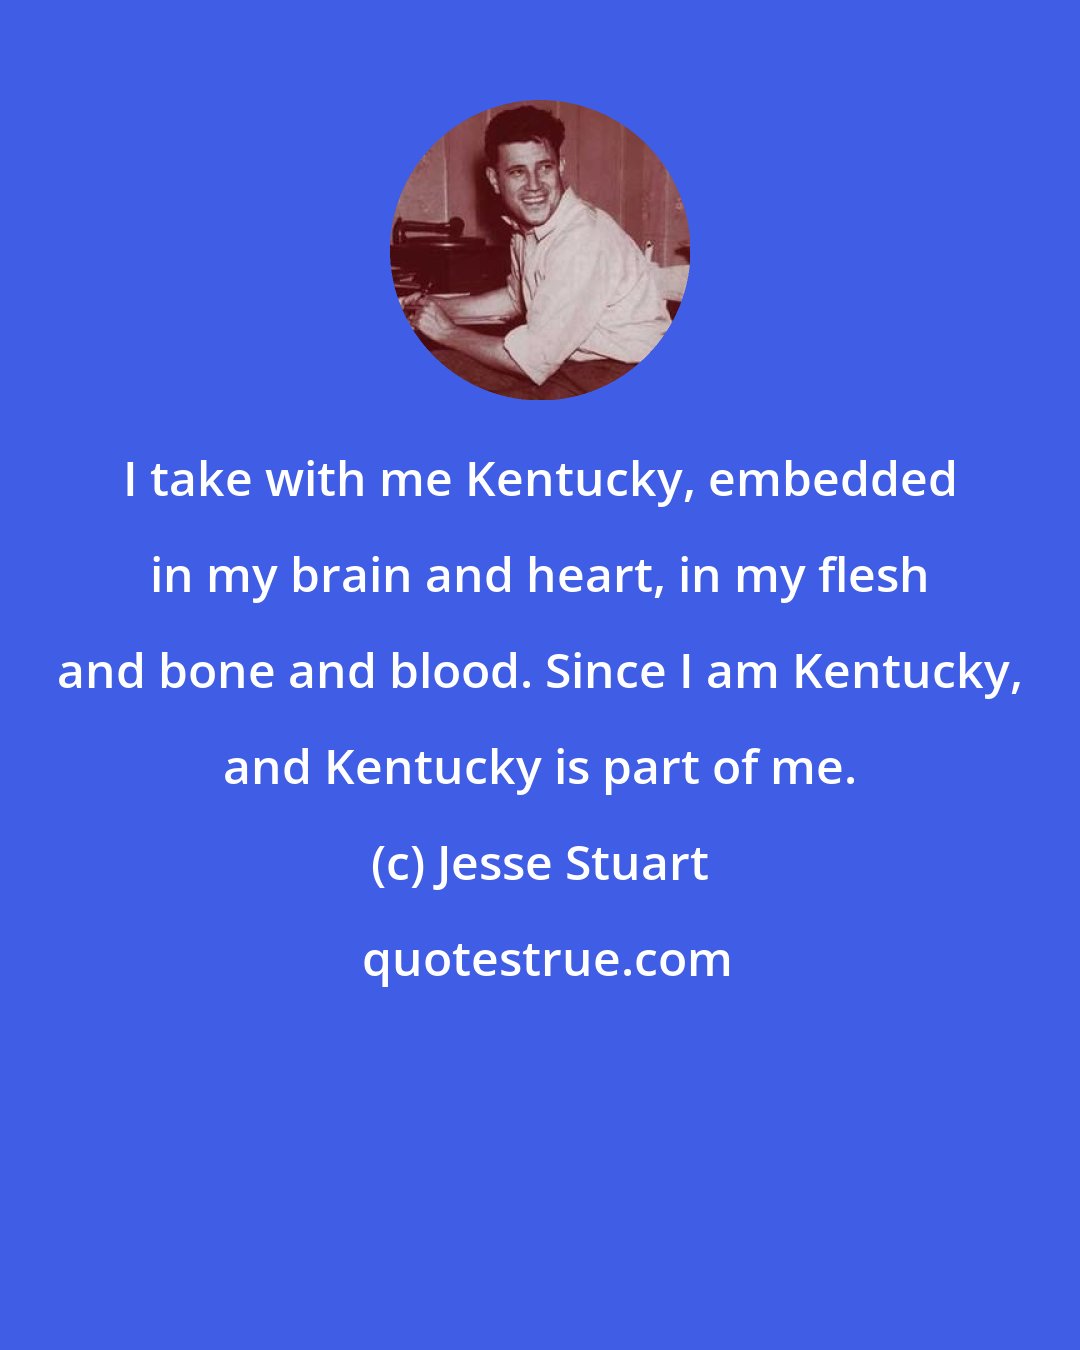 Jesse Stuart: I take with me Kentucky, embedded in my brain and heart, in my flesh and bone and blood. Since I am Kentucky, and Kentucky is part of me.